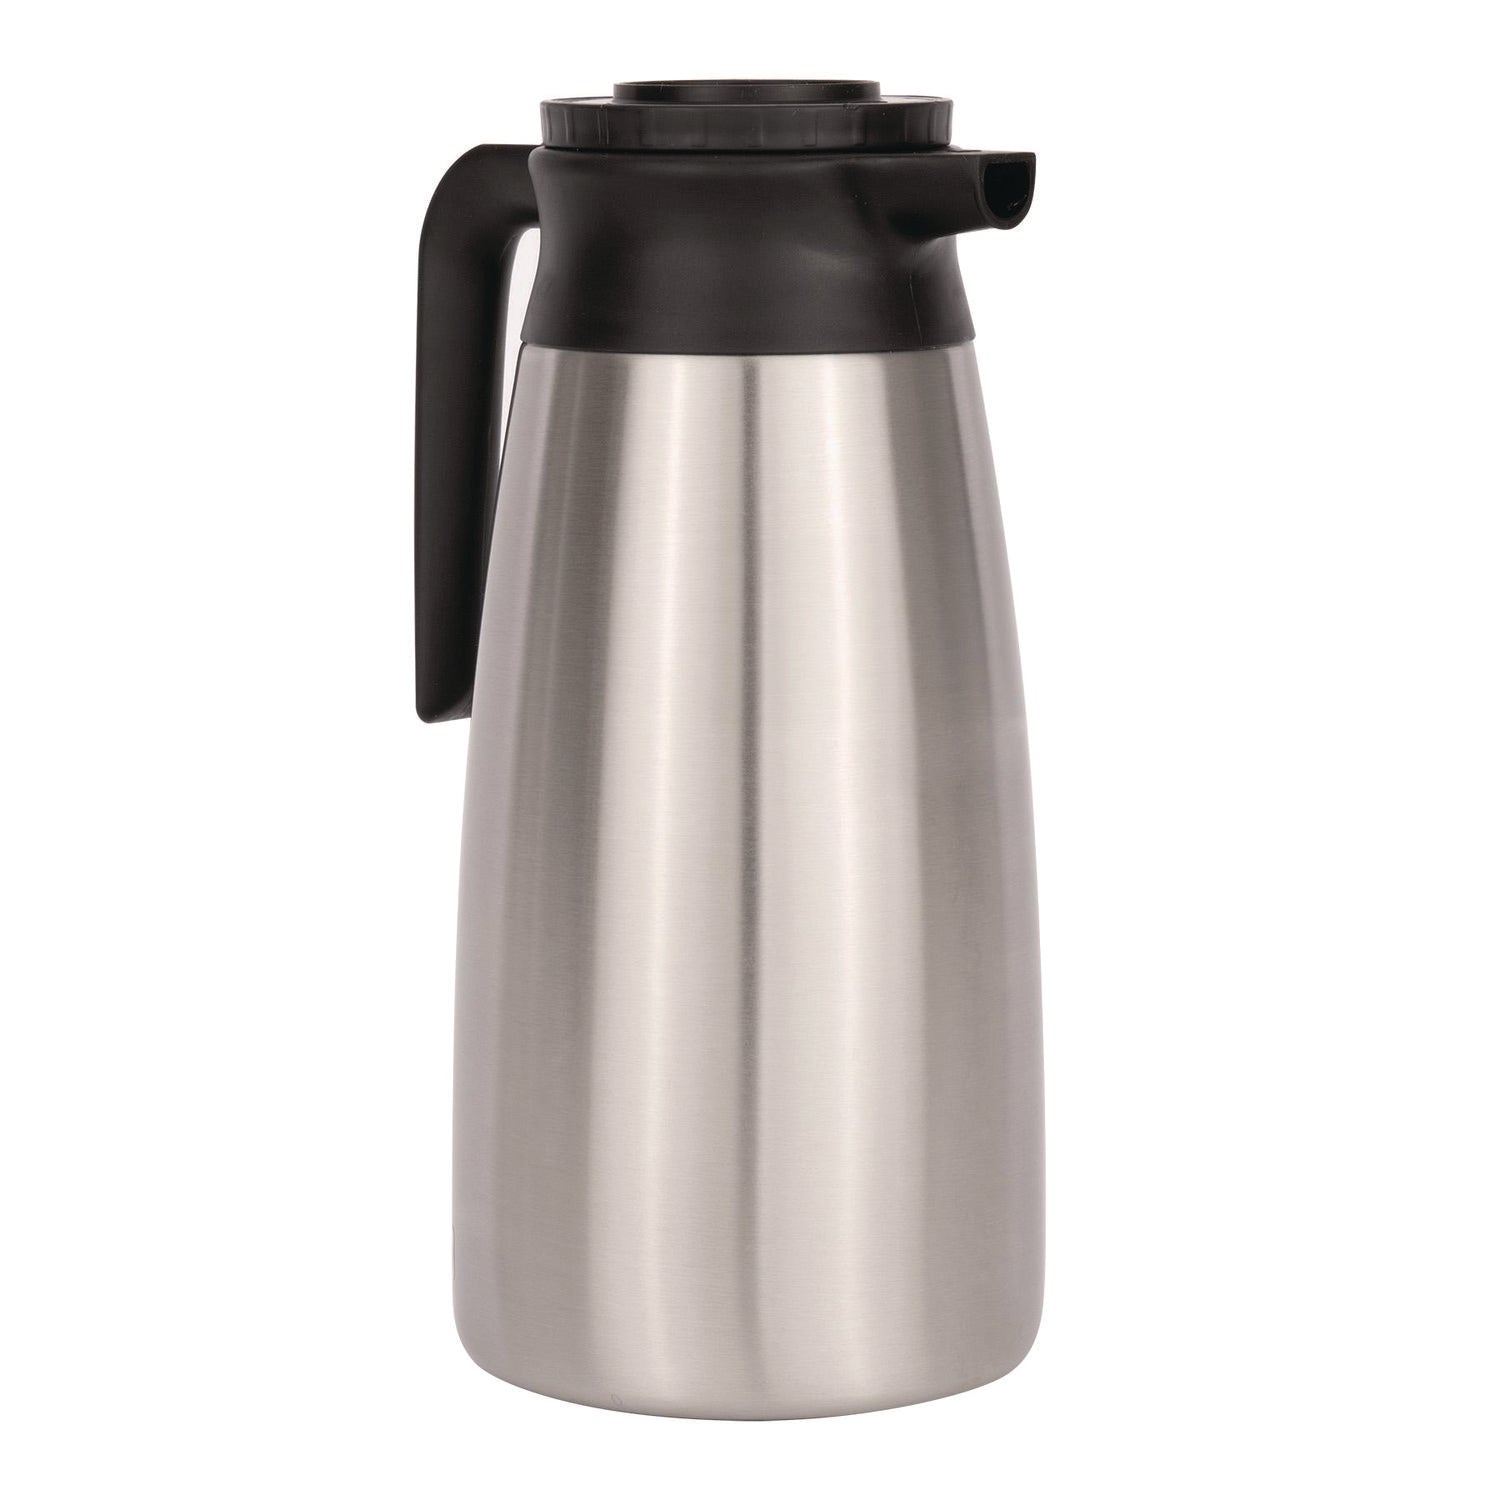 1.9 Liter Thermal Pitcher, Stainless Steel/Black - 1